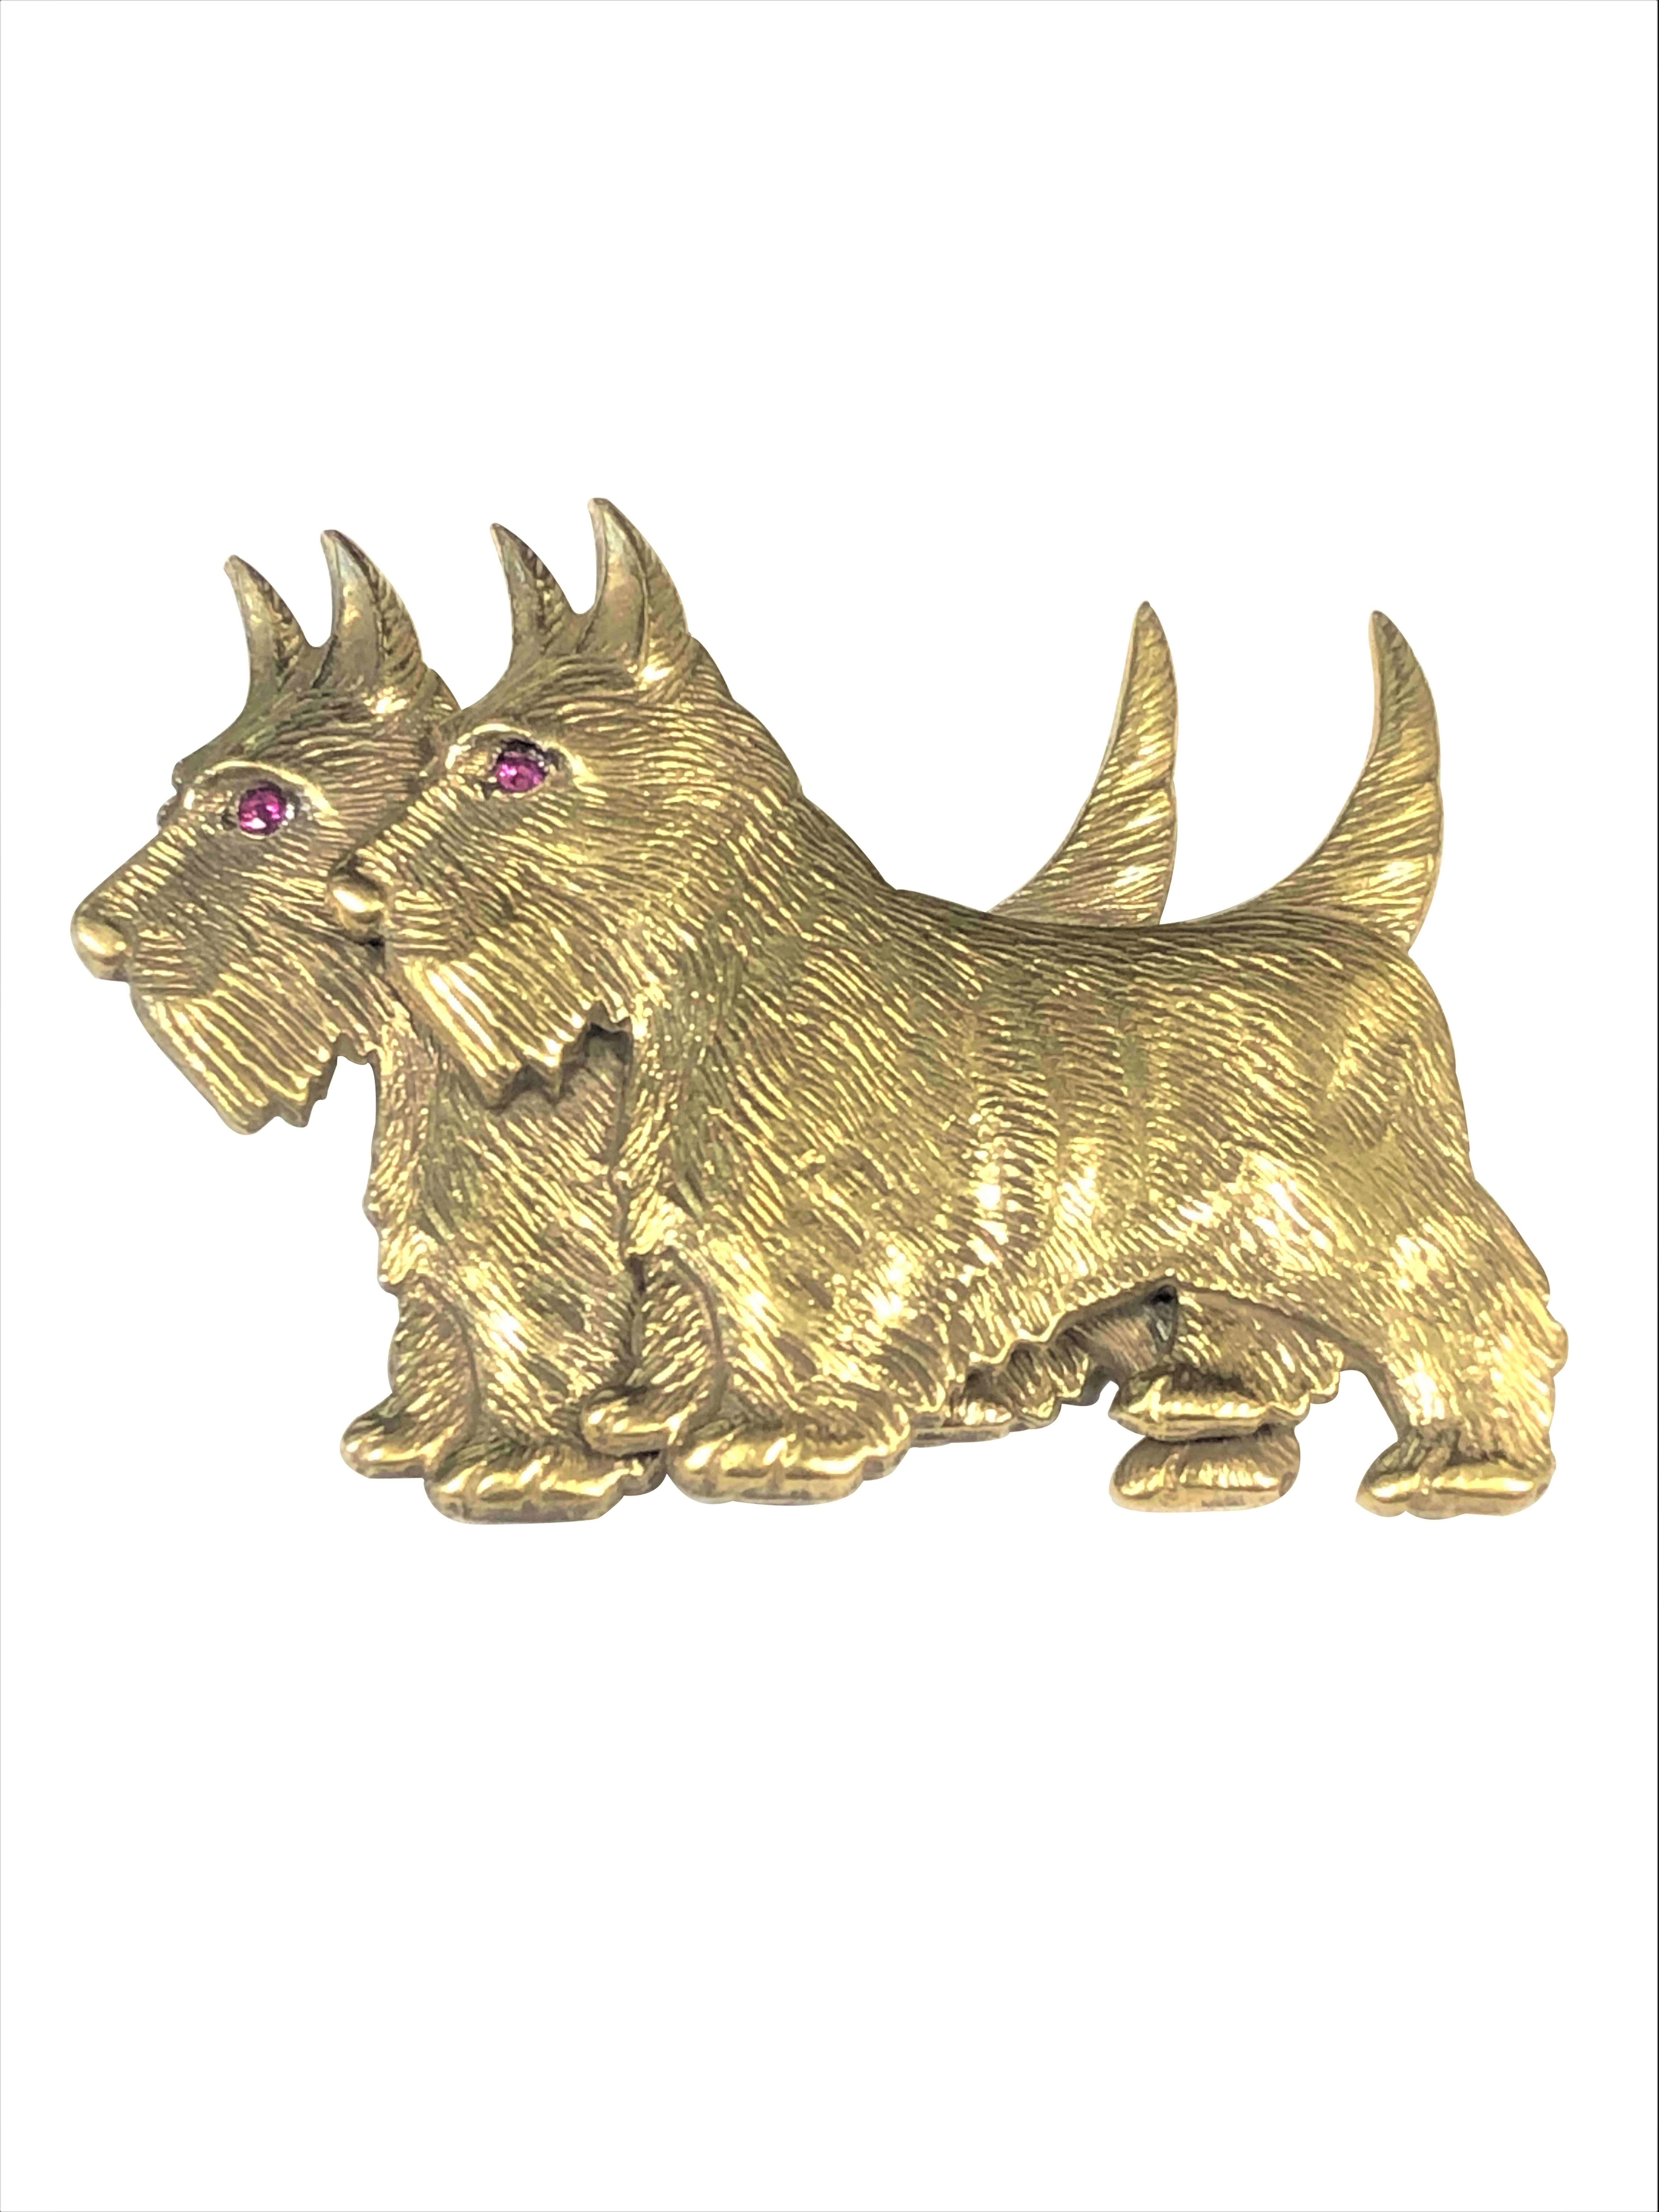 Circa 1960s Vermeil, Gold Plate on Sterling Silver Scottish Terrier Dogs Brooch, measuring 1 1/2 X 1 1/8 inch, very well detailed and having Ruby Eyes.